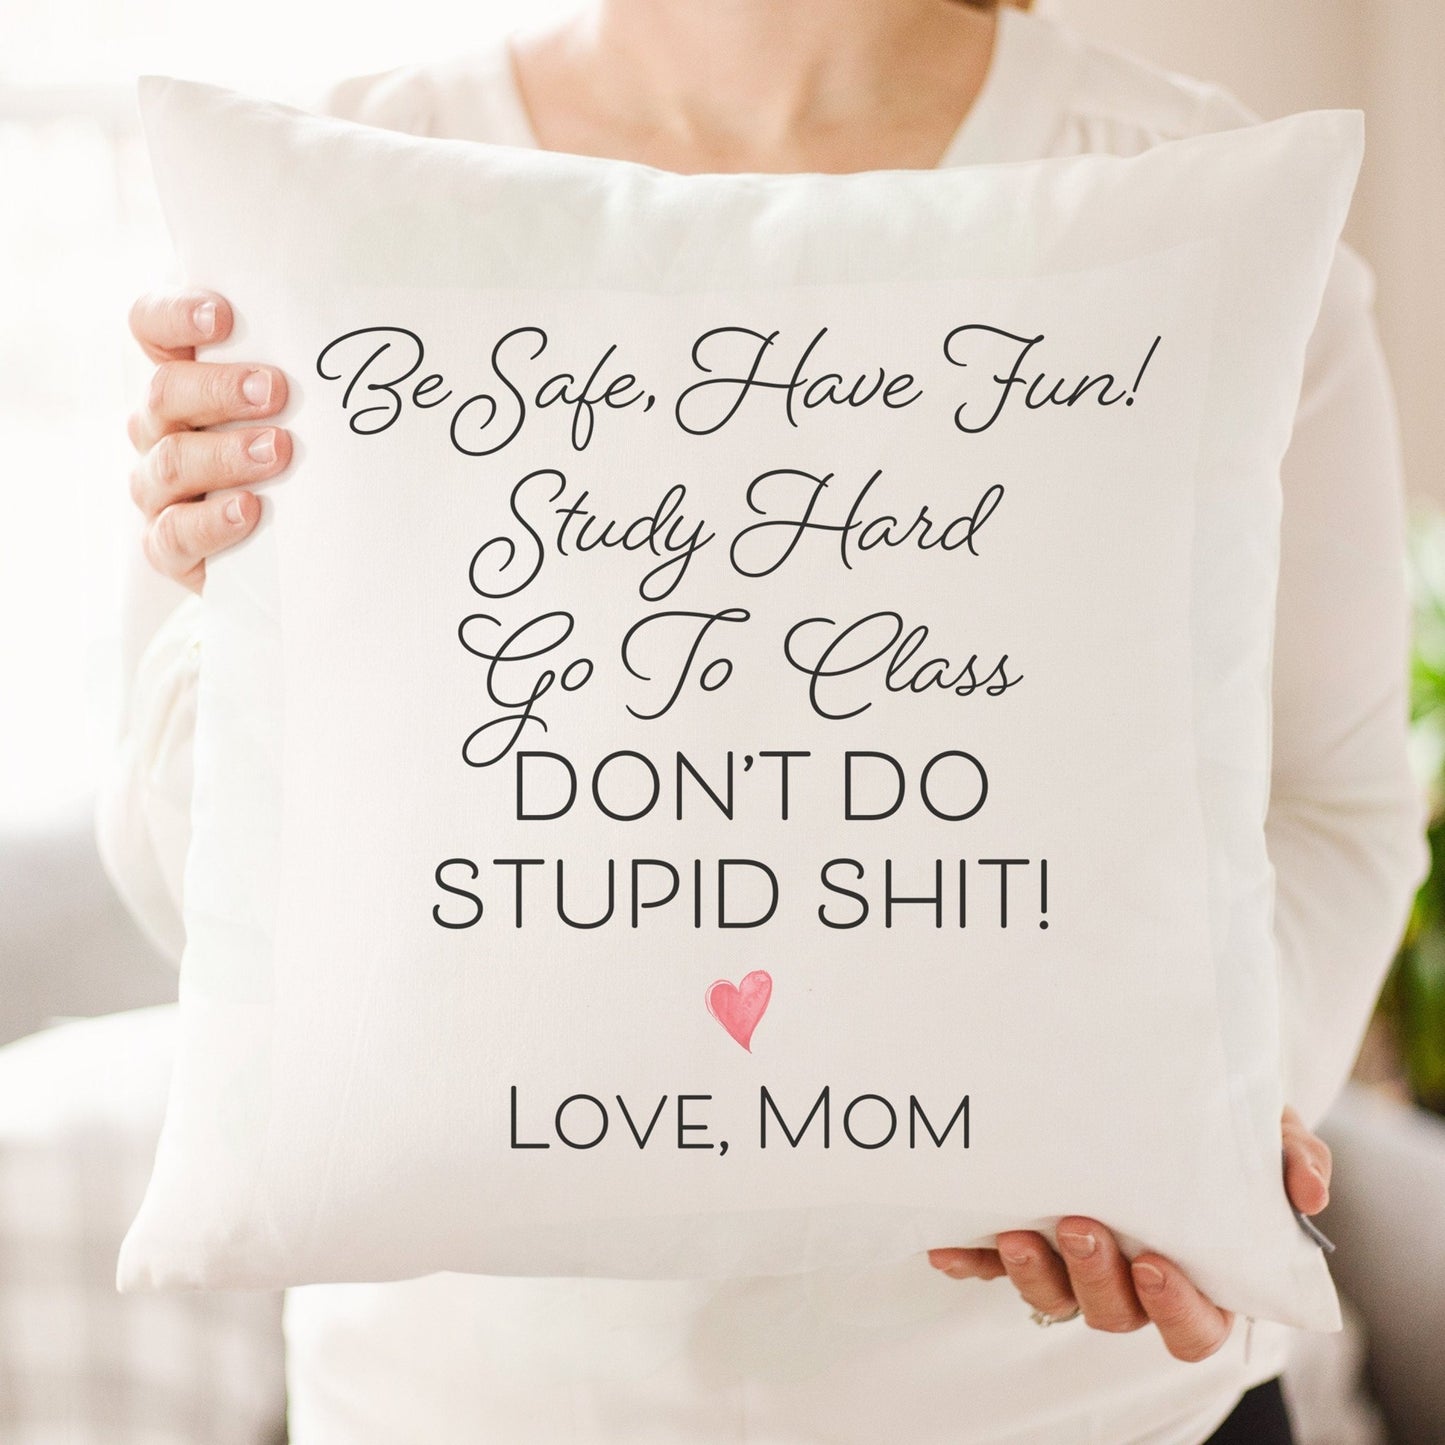 https://sweethooligans.design/cdn/shop/products/be-safe-have-fun-dont-do-stupid-shit-dorm-pillow-dorm-decor-going-away-gift-gift-for-son-gift-for-daughter-college-dorm-gift-128693_1445x.jpg?v=1668882673